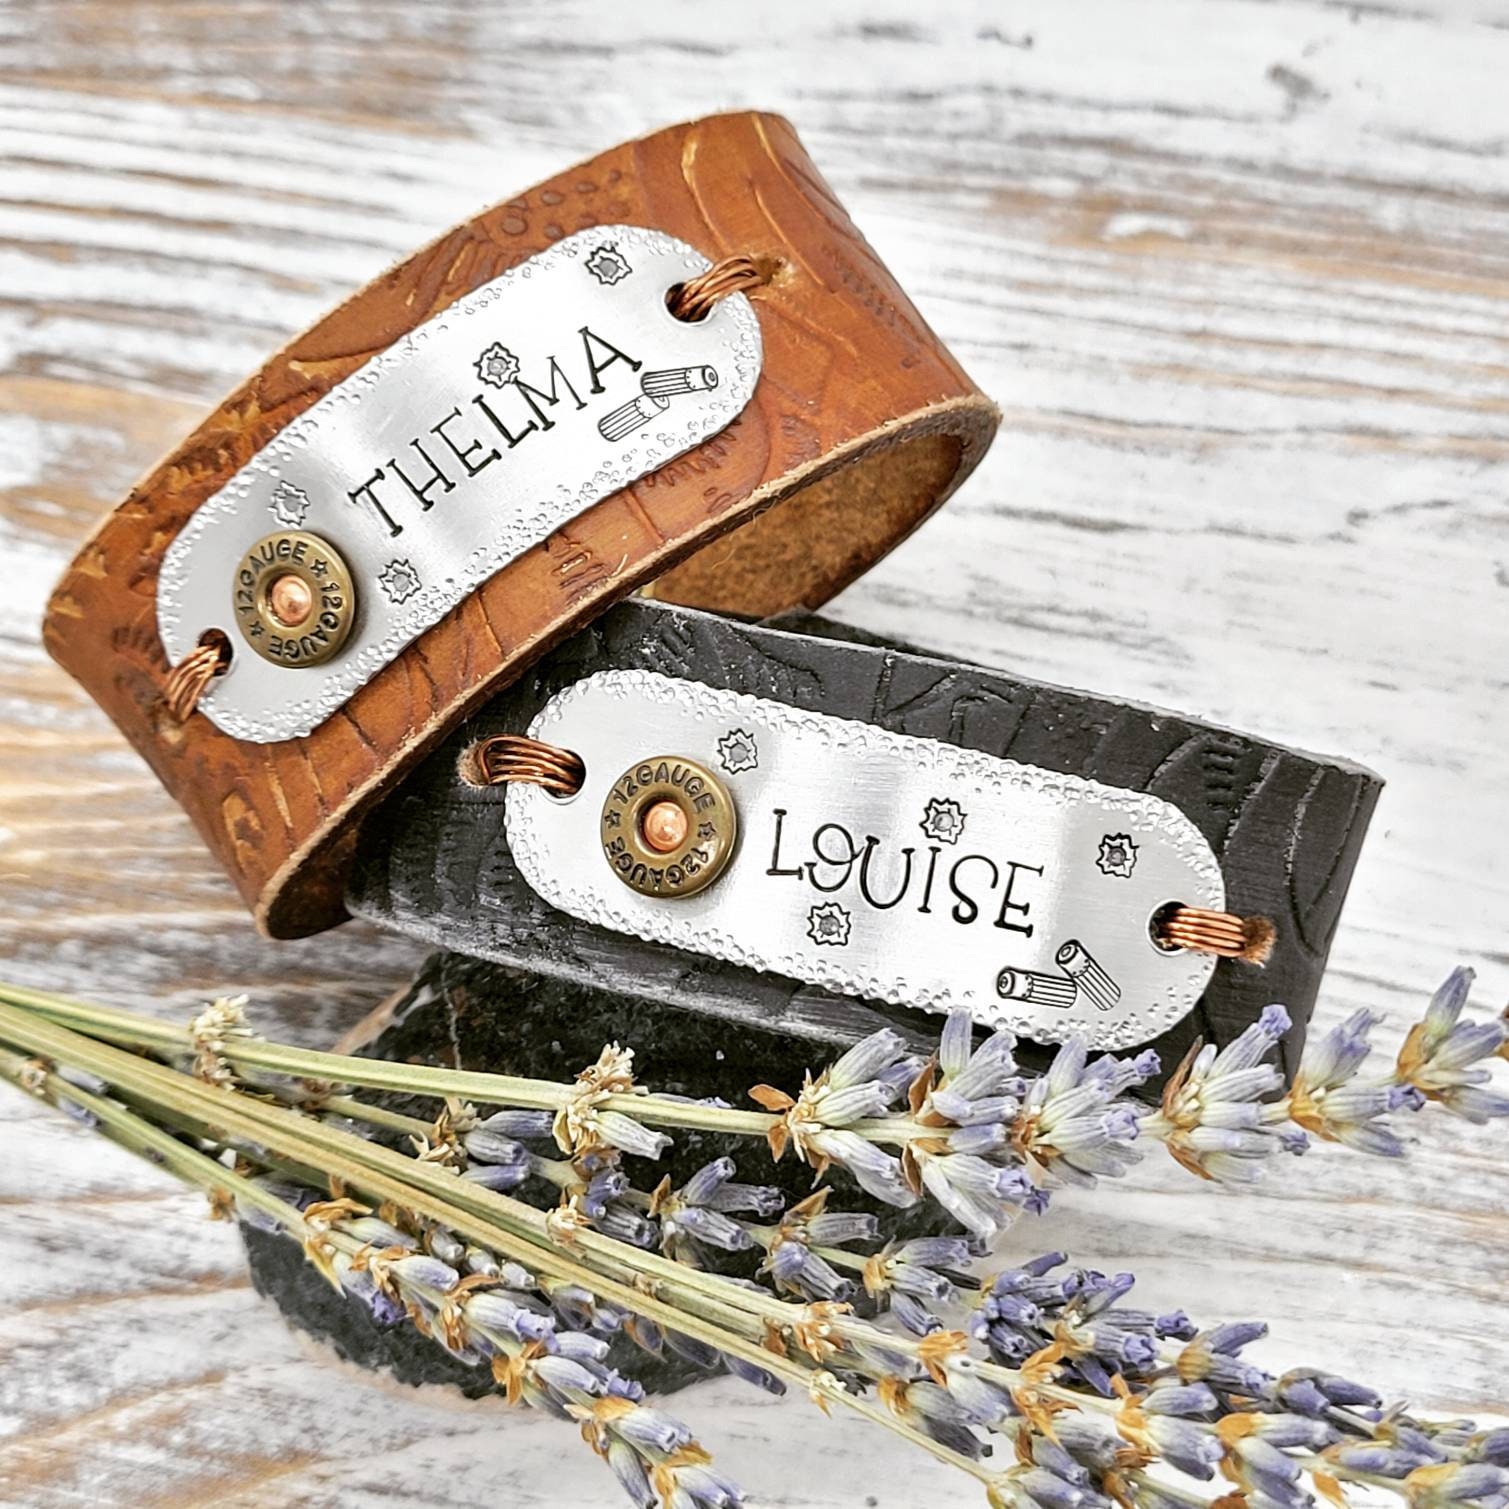  bobauna Thelma and Louise Bracelet You're The Louise